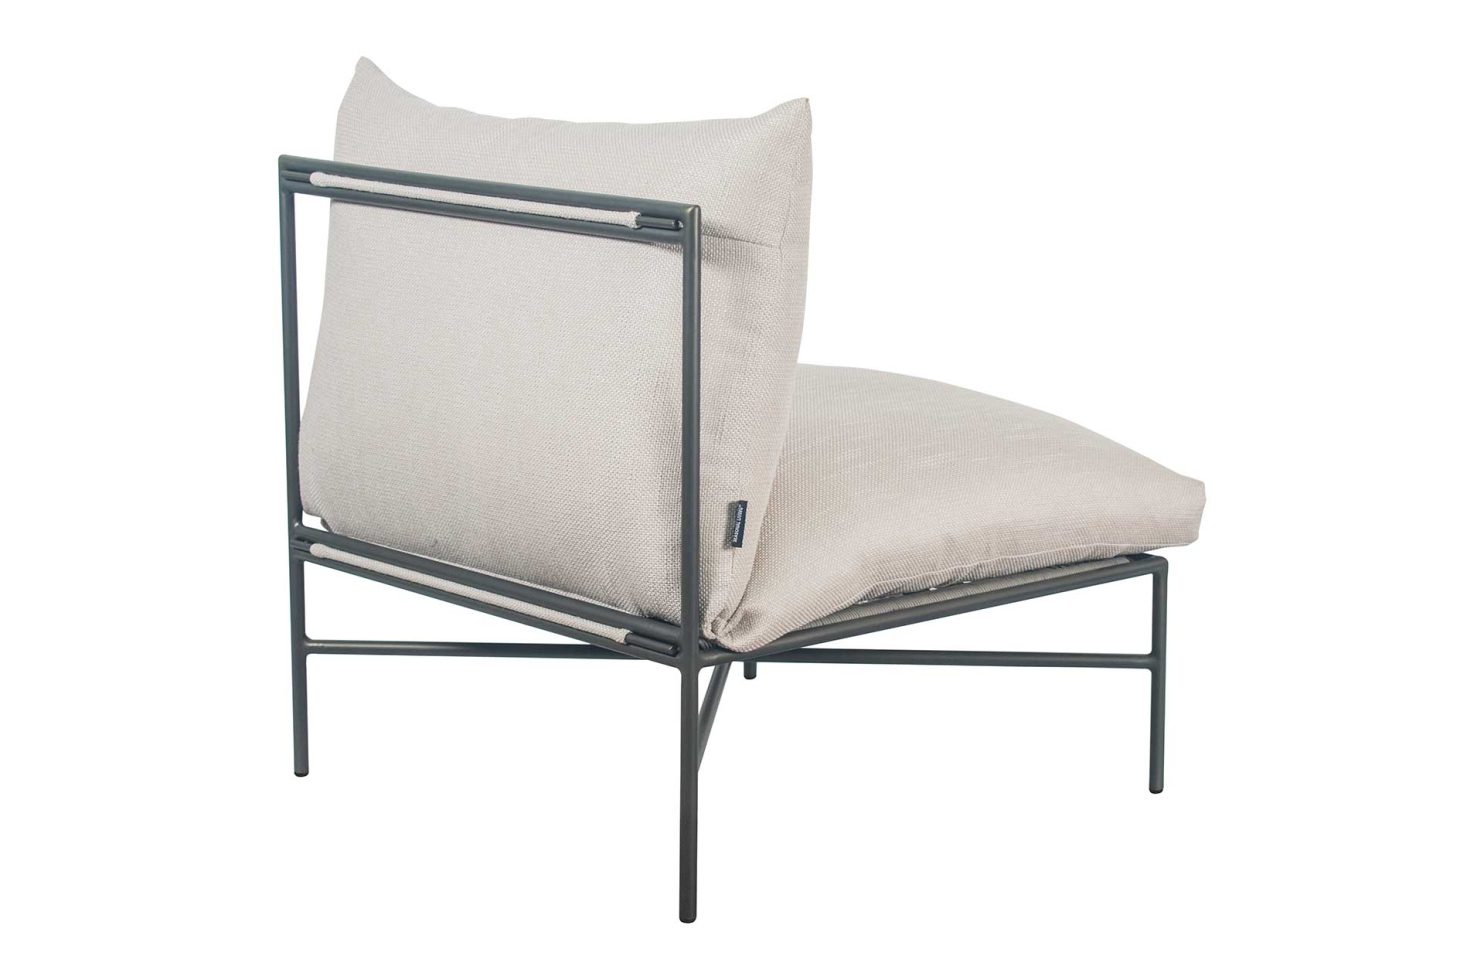 arch hebrides sectional armless chair A620230001 1 3Q back web